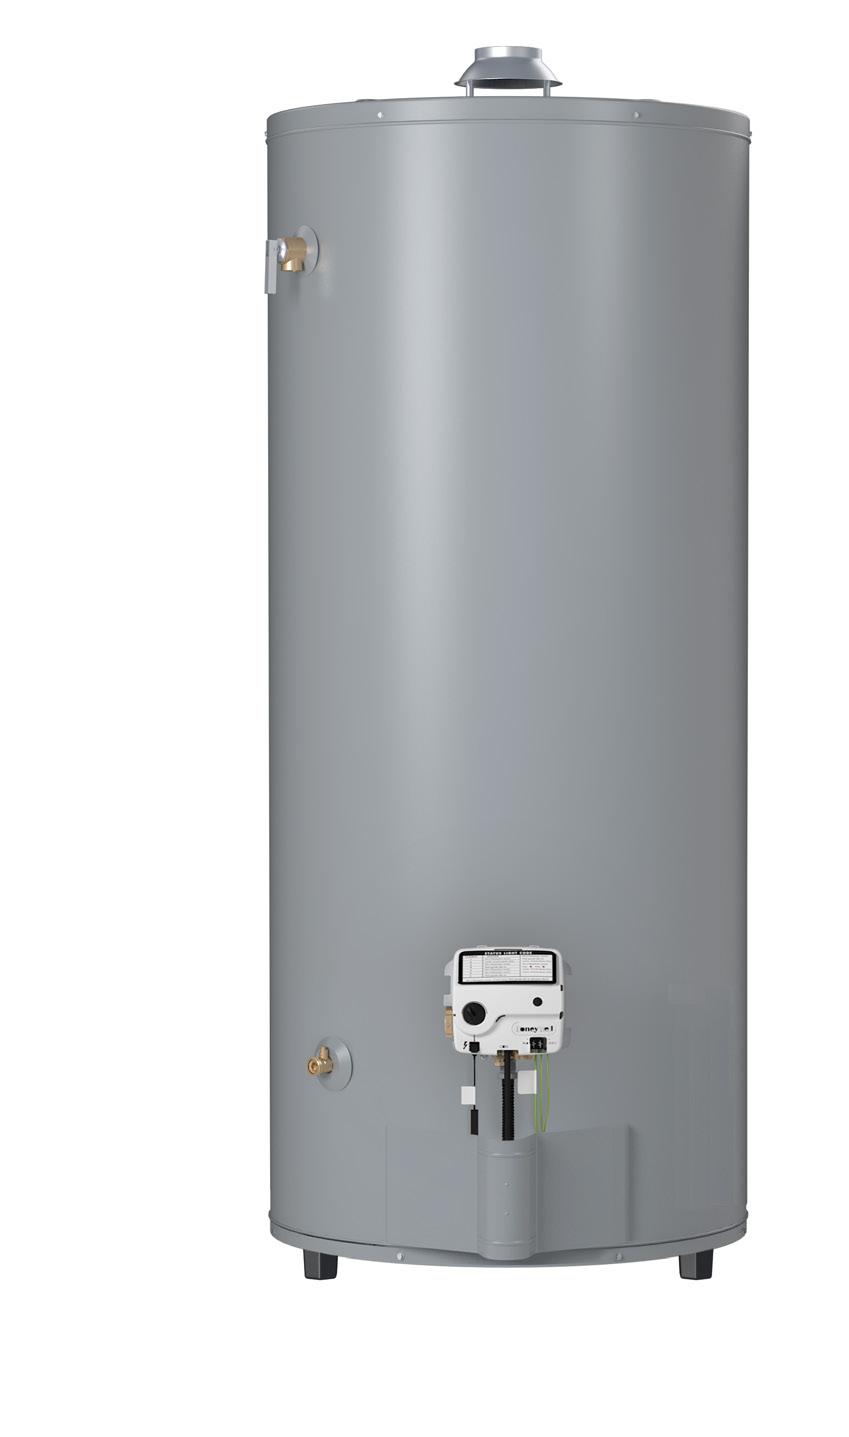 Instruction Manual RESIDENTIAL GAS WATER HEATERS NOT FOR USE IN MANUFACTURED (MOBILE) HOMES INSTALLATION - OPERATION - SERVICE - MAINTENANCE Low Lead Content WARNING: If the information in these